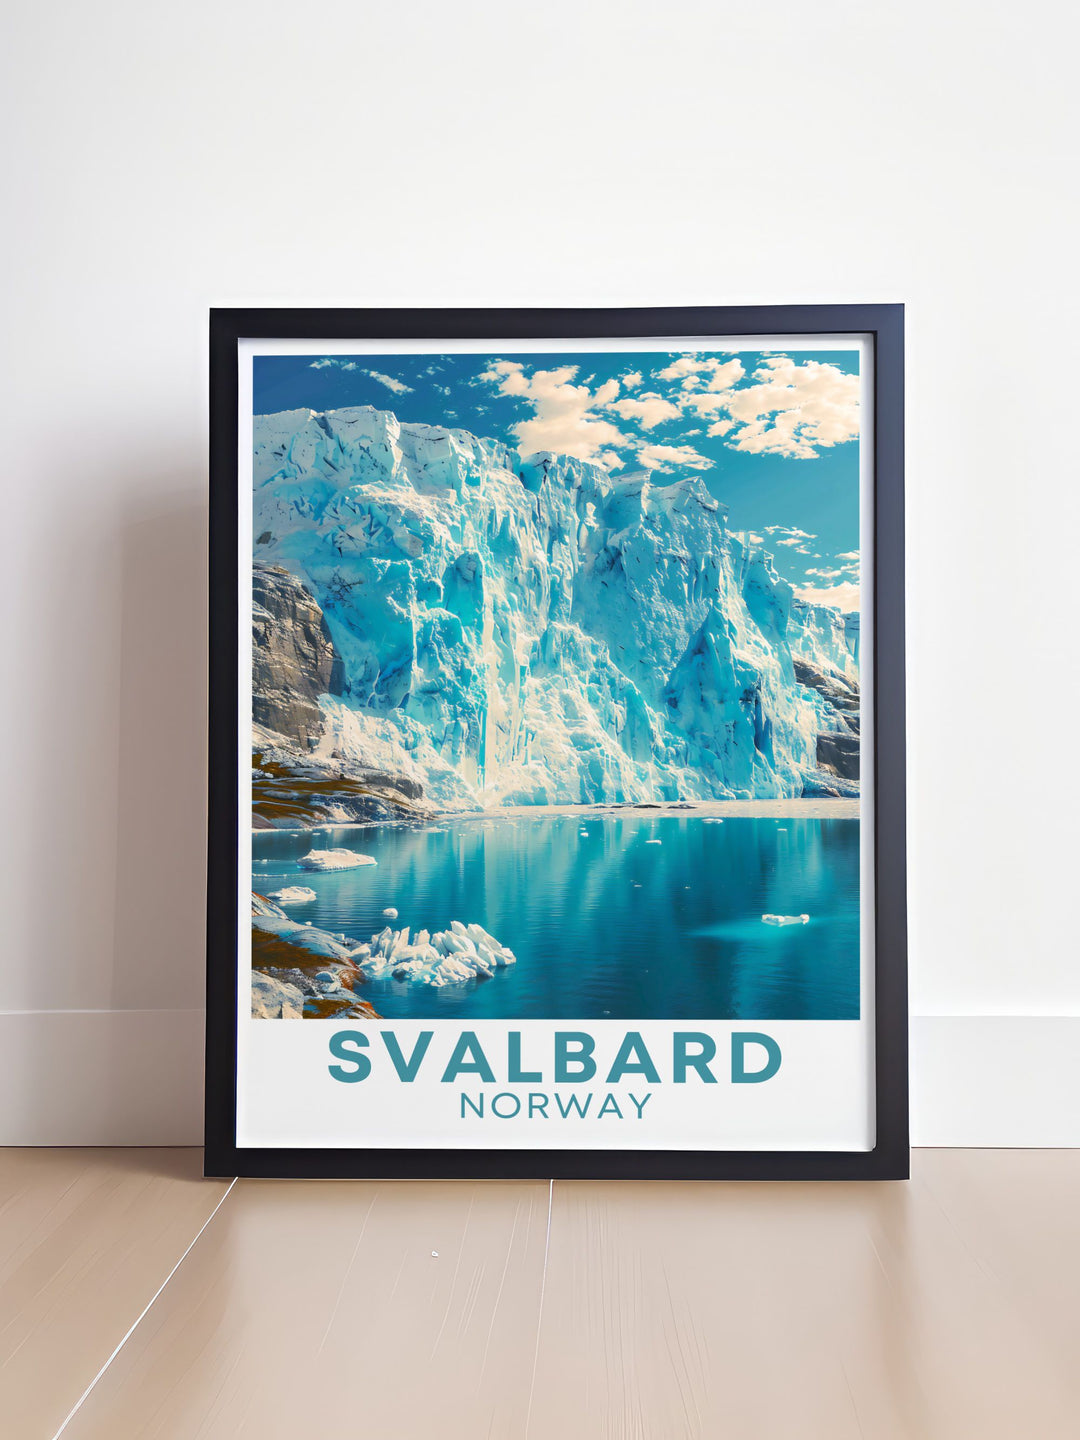 Unique Svalbard city map with intricate details of the Nordenskiold Glacier and its surroundings. Ideal for vintage poster enthusiasts and personalized gifts adding elegance and sophistication to any space.